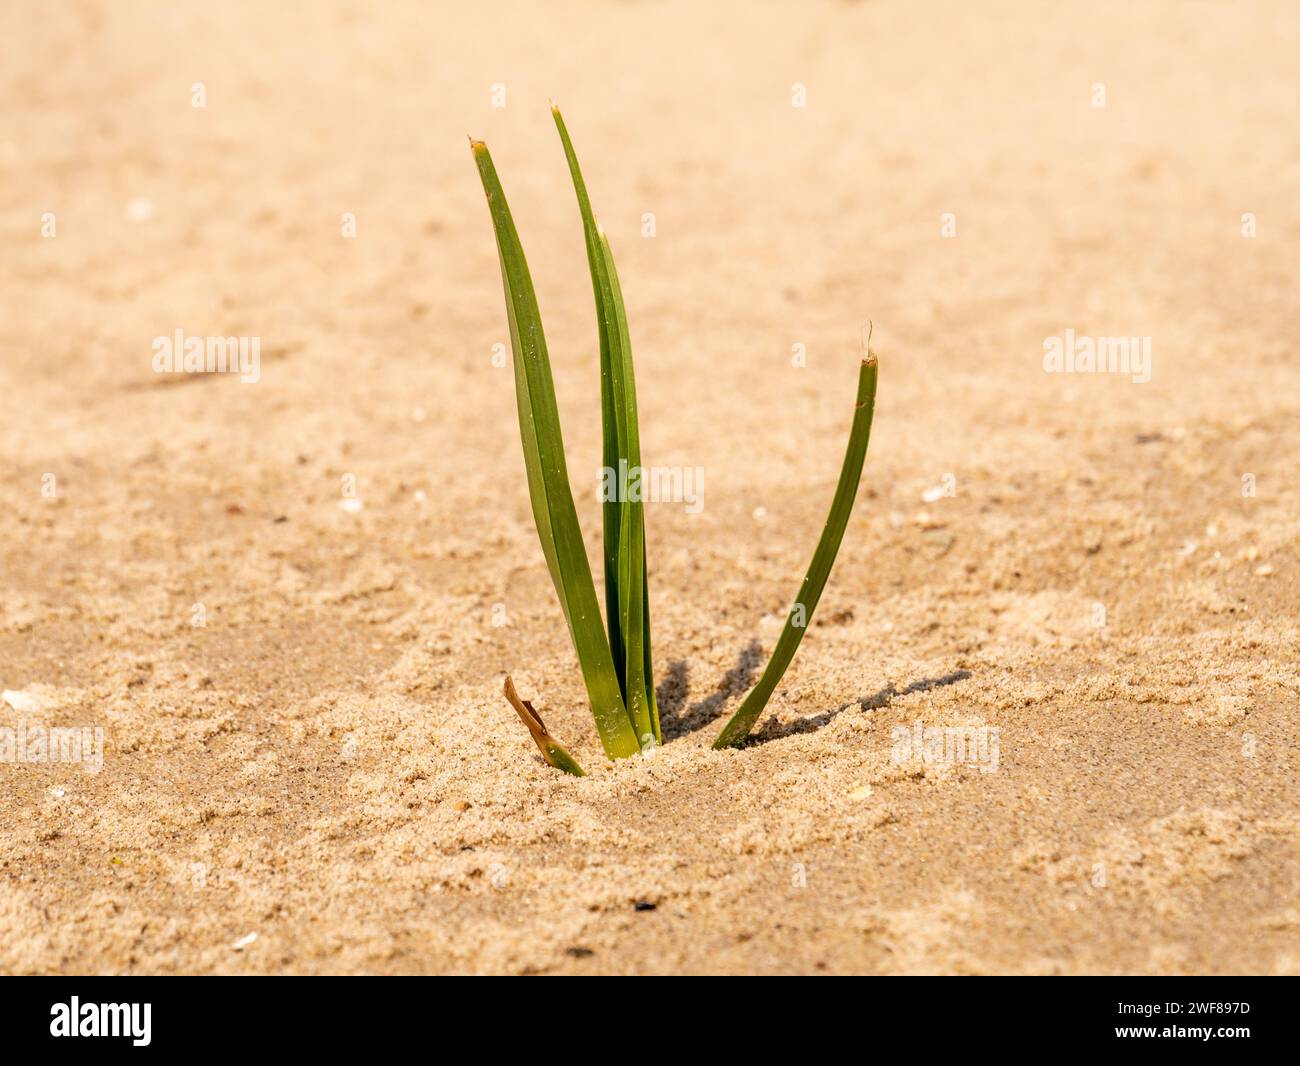 Common cordgrass, Spartina anglica, young plant on sandflat of tidal flat at low tide, Kwade Hoek, Goeree, Zuid-Holland, Netherlands Stock Photo